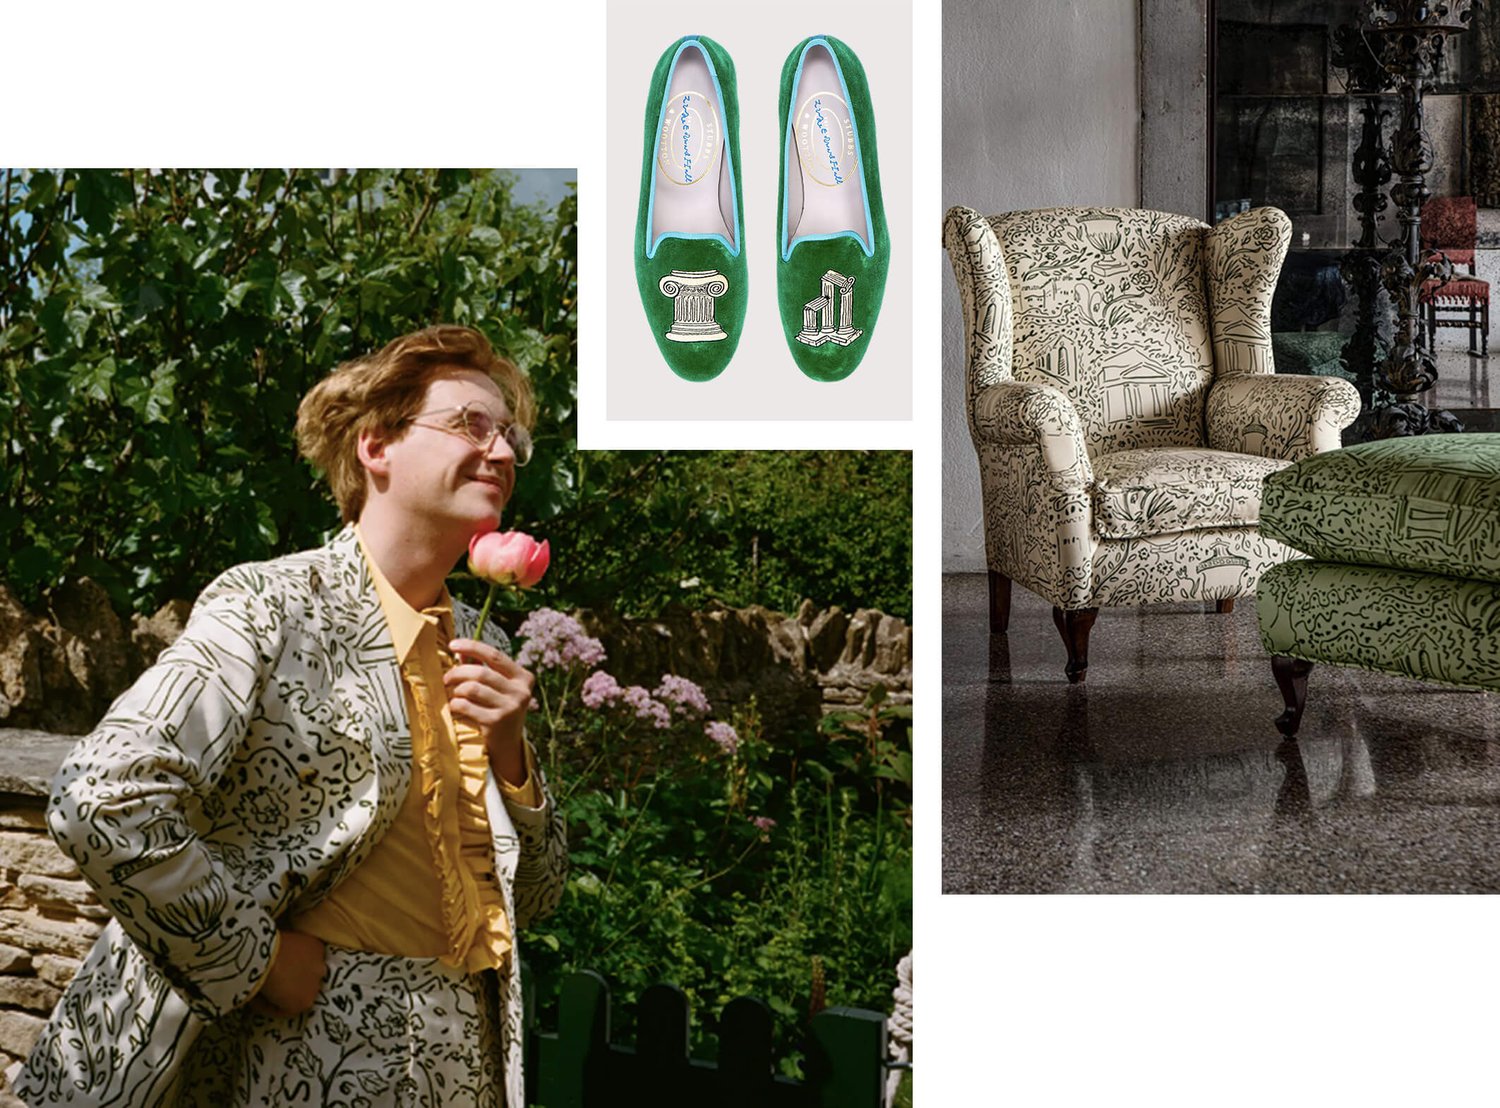 Designer in suit with graphic pattern holding a flower in a lovely garden. Inset image of velvet slippers with metal column details. The third image of an upholstered armchair and ottoman with same graphic fabric as suit in other image.